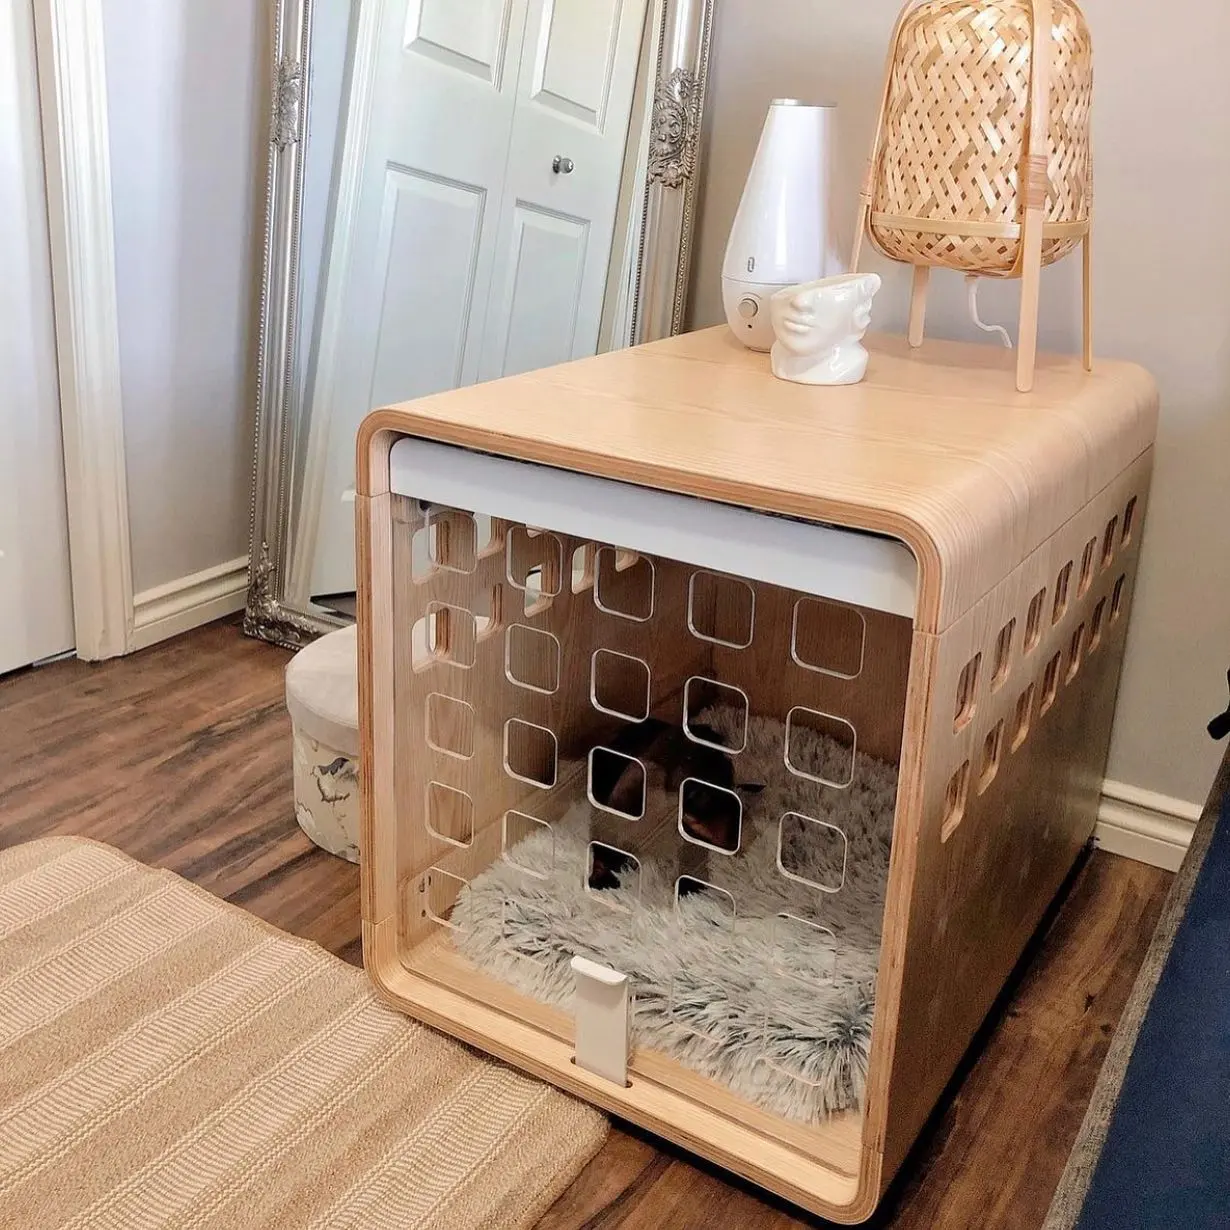 Fable Premium Wood Dog Crate White acrylic Door That Stows Seamless Design Doubles As Dog Crate End Table wooden dog kennel